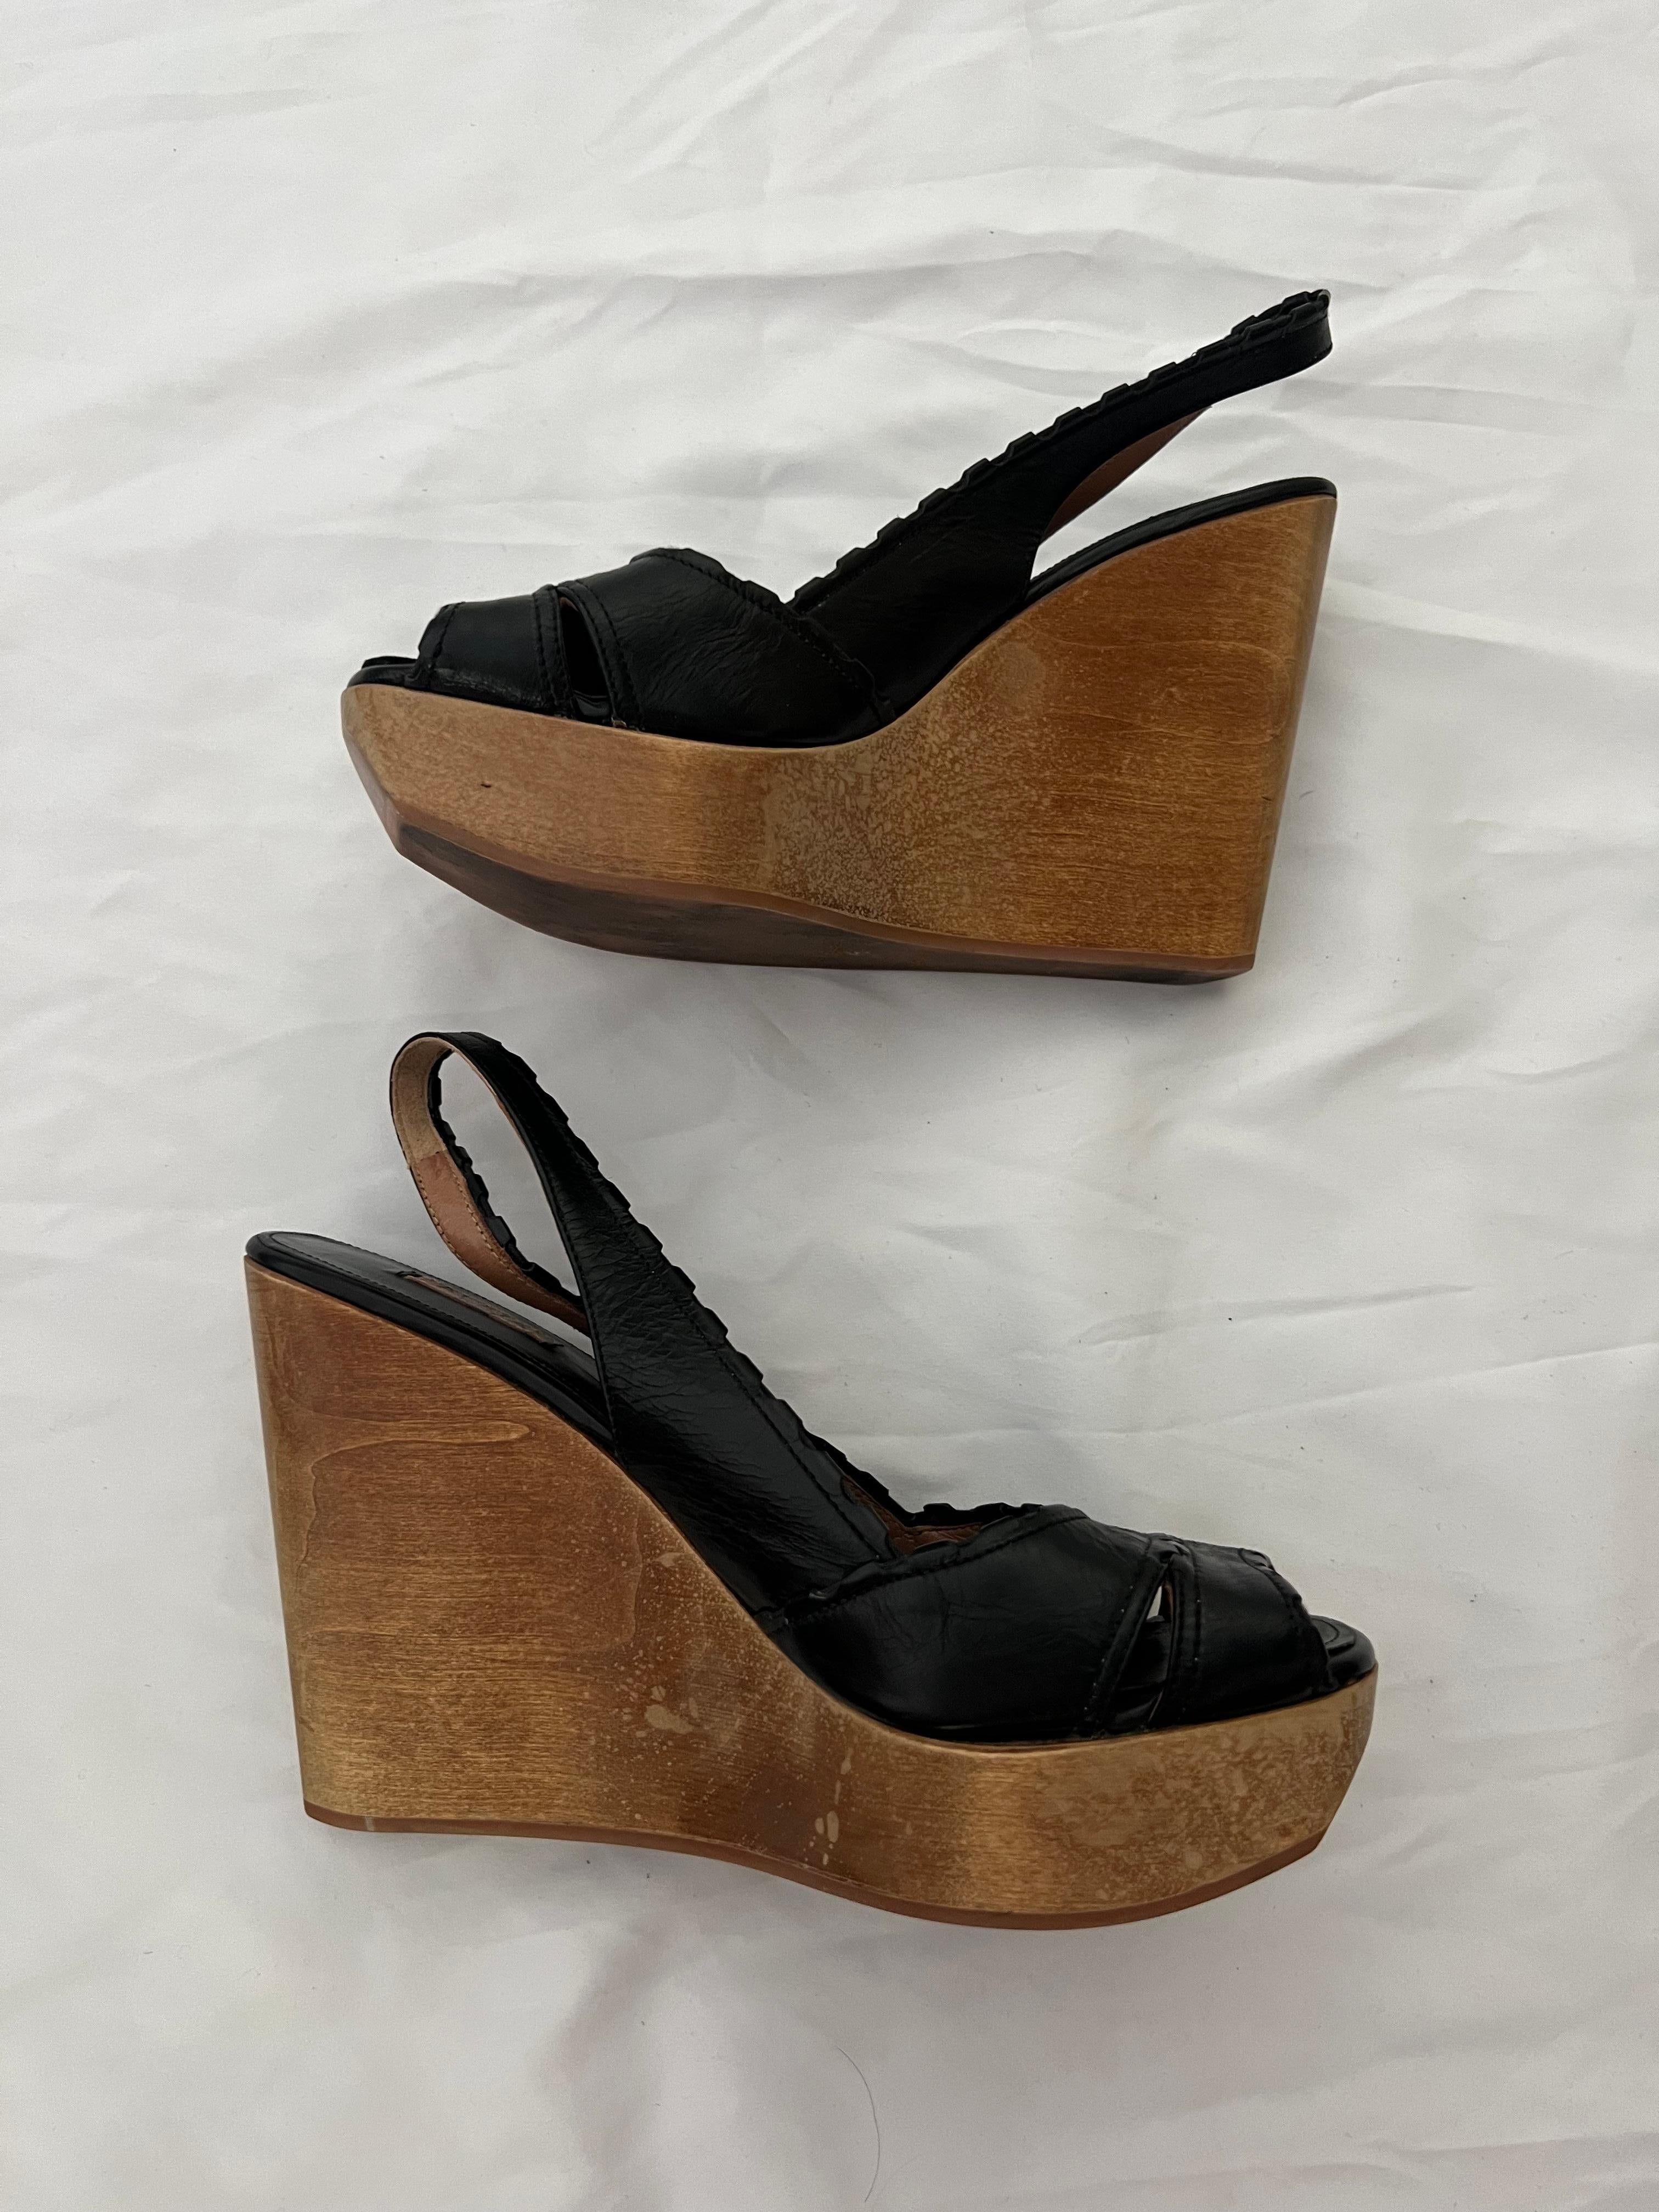 Alaia Paris Leather and Wood Platform Wedge Sandals, Size 40 In New Condition For Sale In Beverly Hills, CA